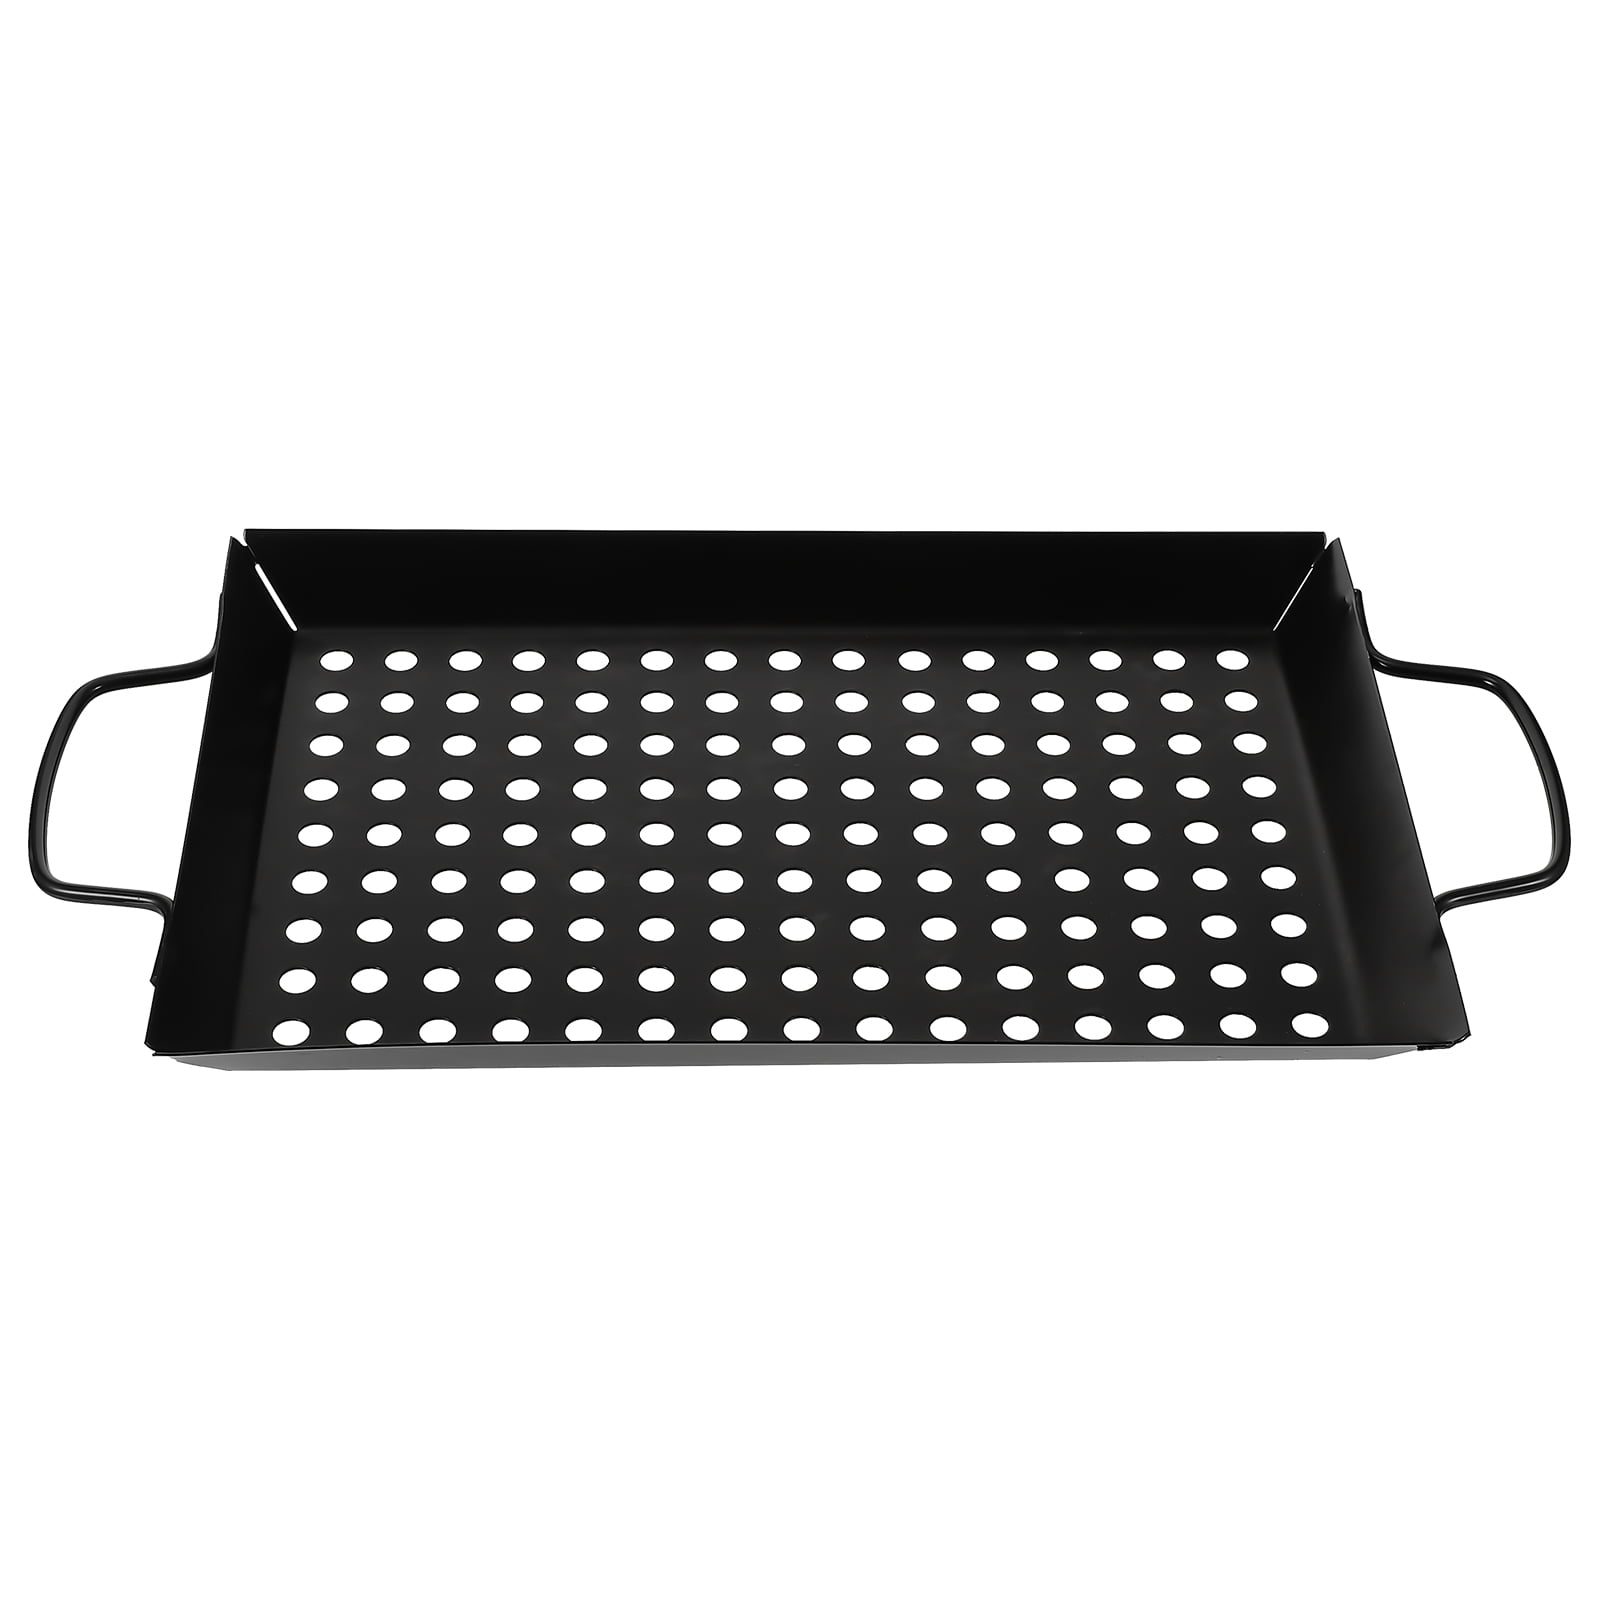 Large Non-Stick Cast Iron Pan Tray Reversible Griddle Plate Barbecue Grill Pan 